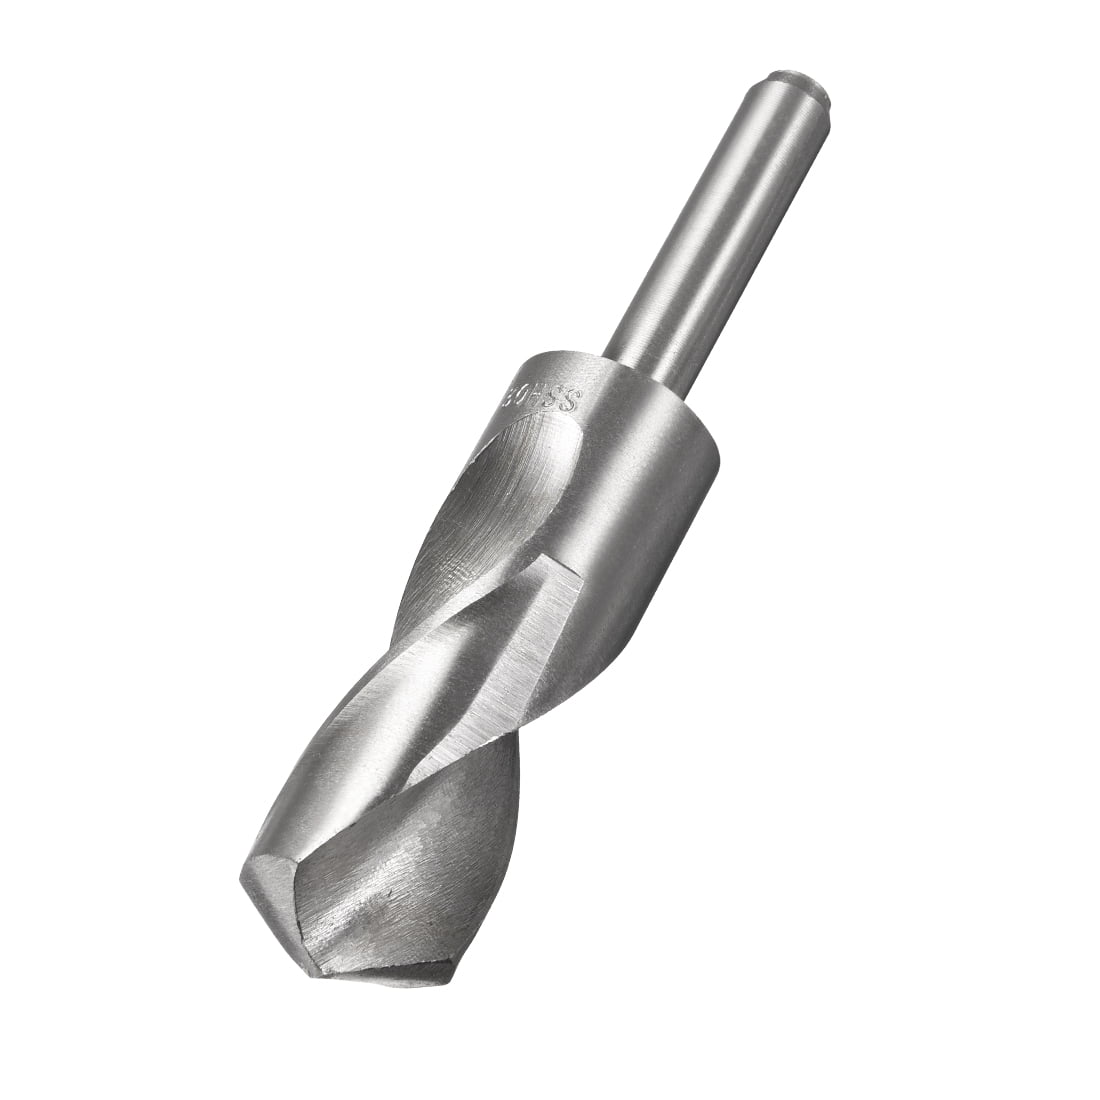 Drill Bit for Boring and Milling Processing Iron 30mm Round Shank Drill Bit